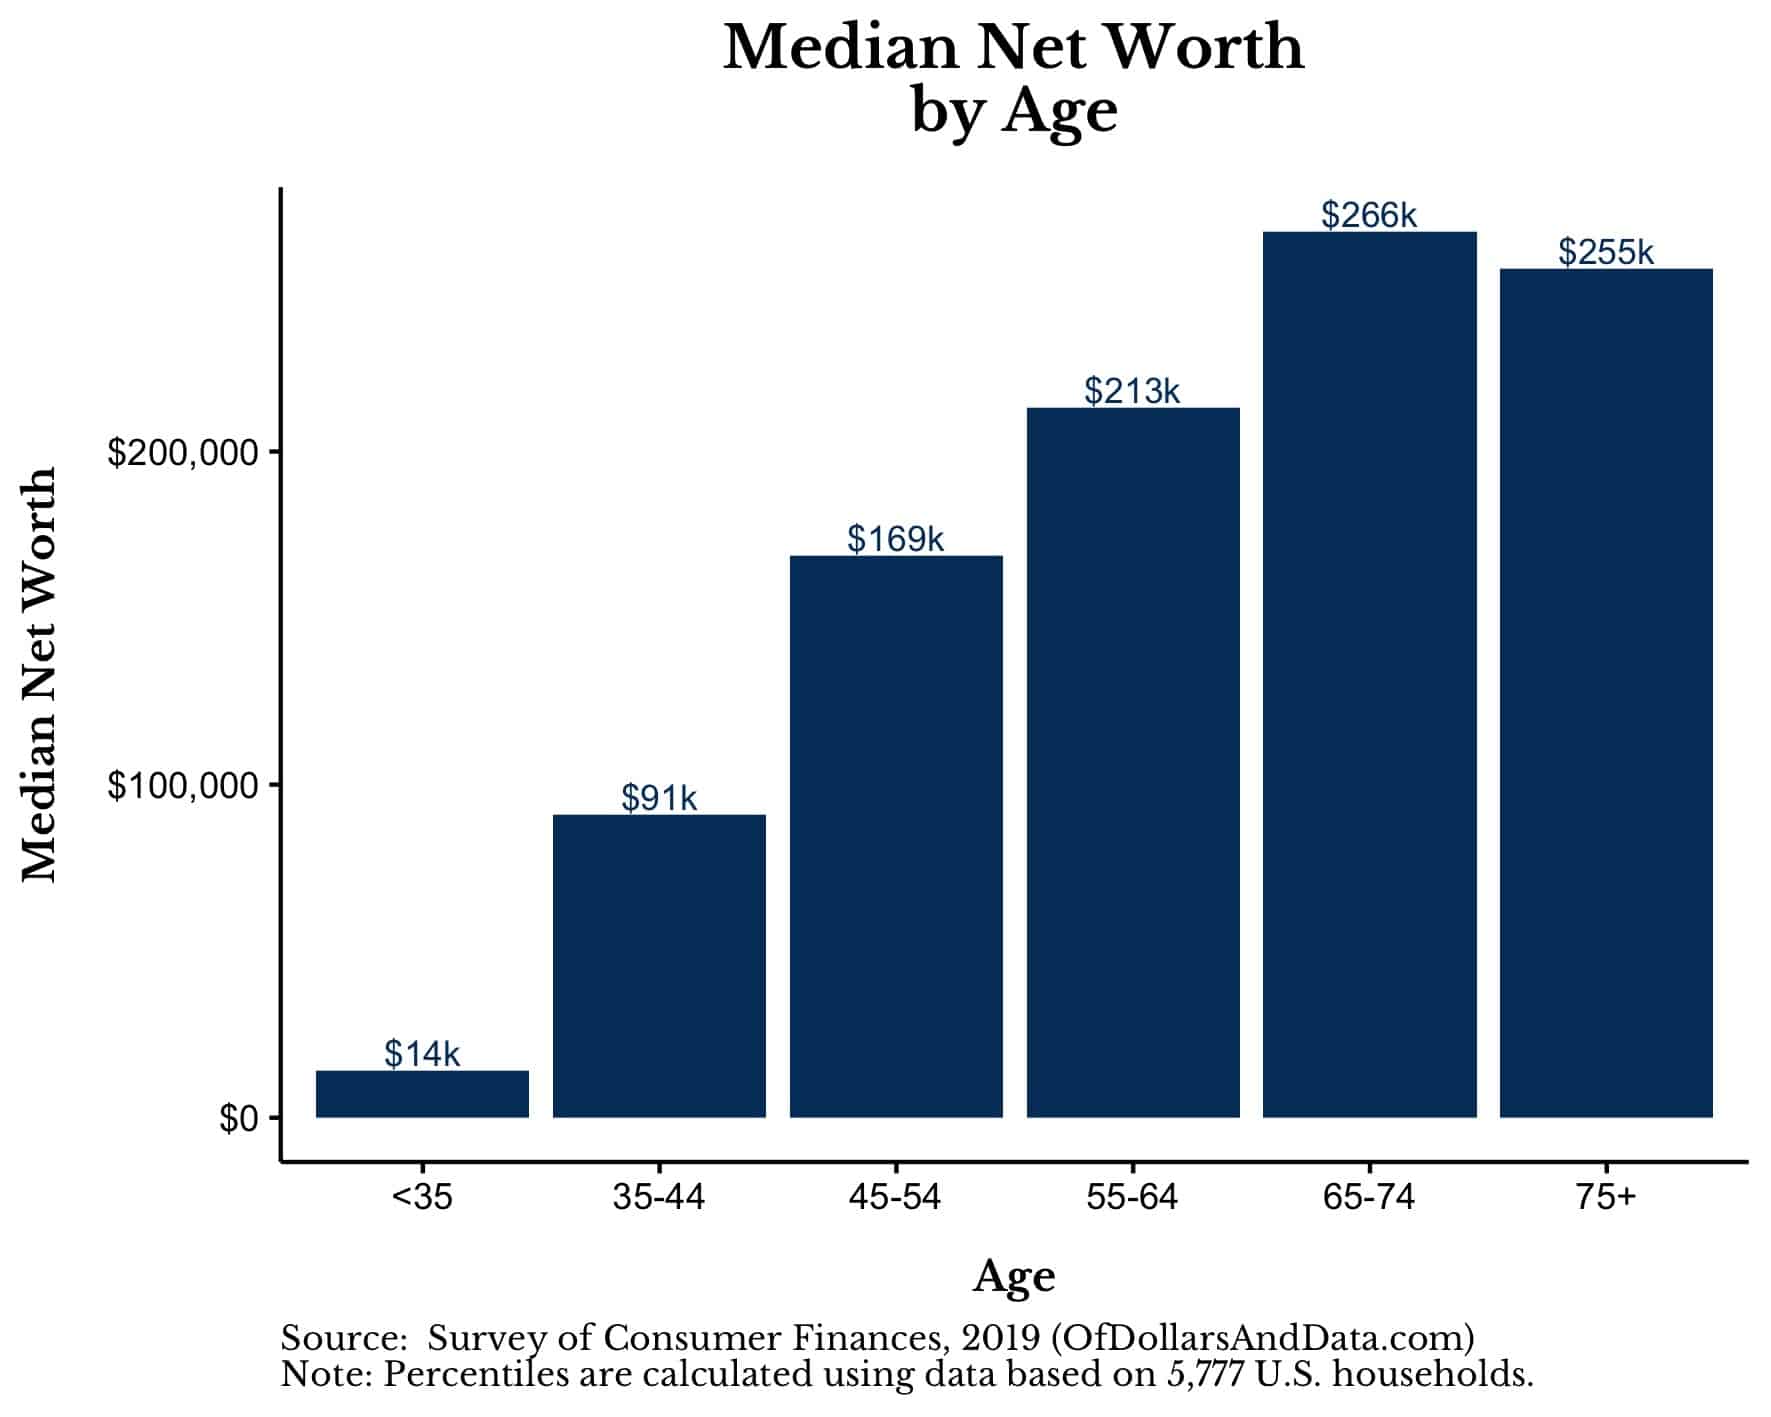 Median Net worth by age for the 2019 Survey of Consumer Finances